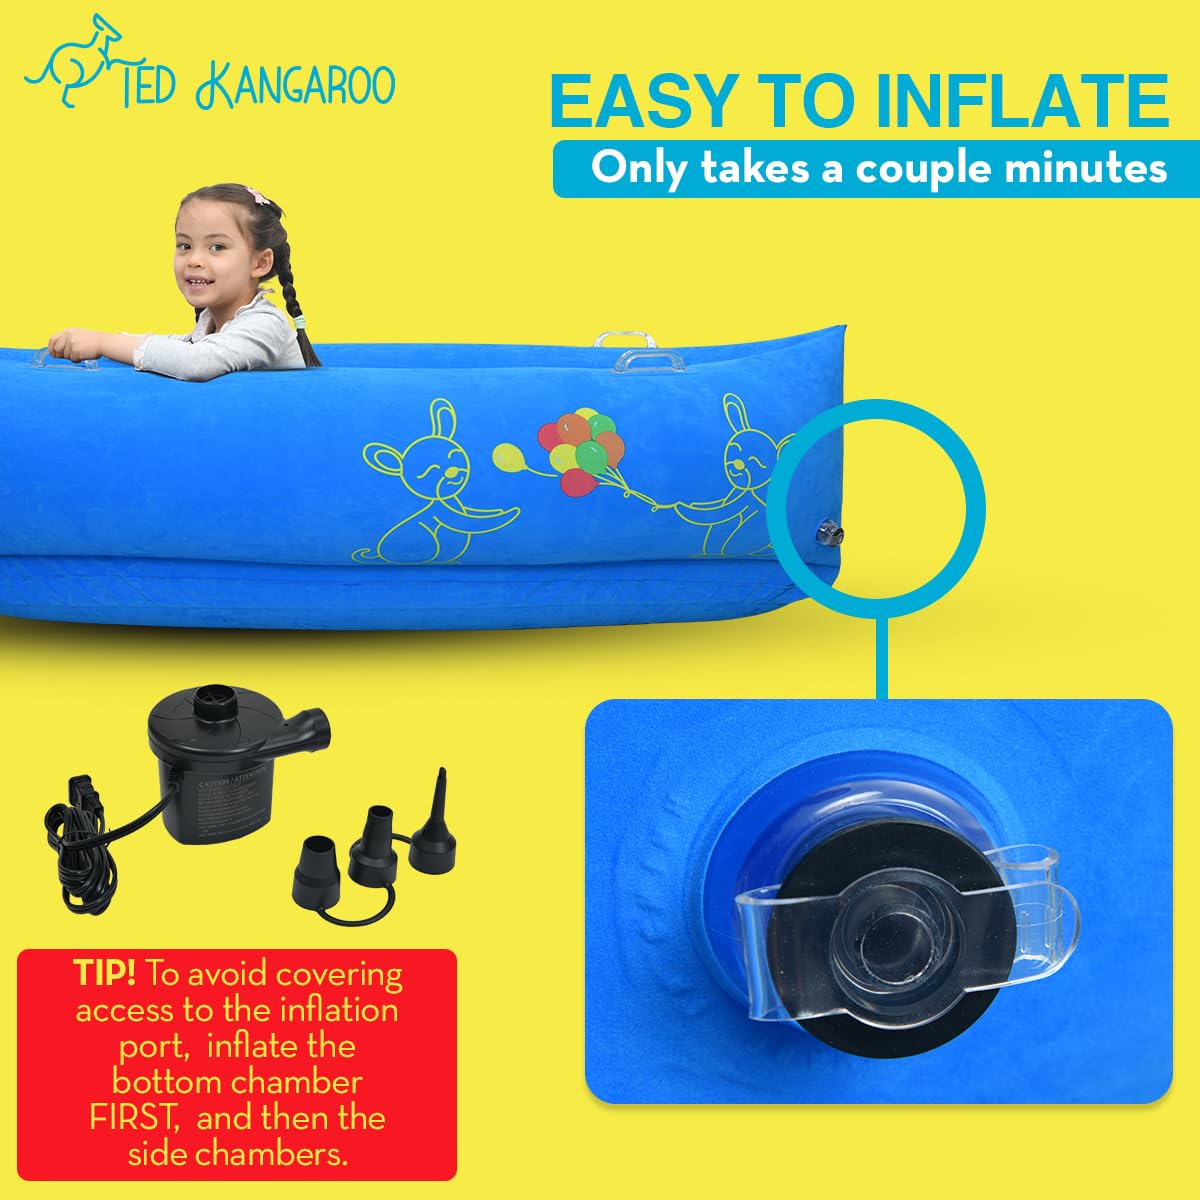 Ted Kangaroo Sensory Chair for Kids with Autism - Inflatable Chair Pod & Inflatable Therapeutic Peapod, Sensory Toys for Autistic Children, Includes Electric Air Pump